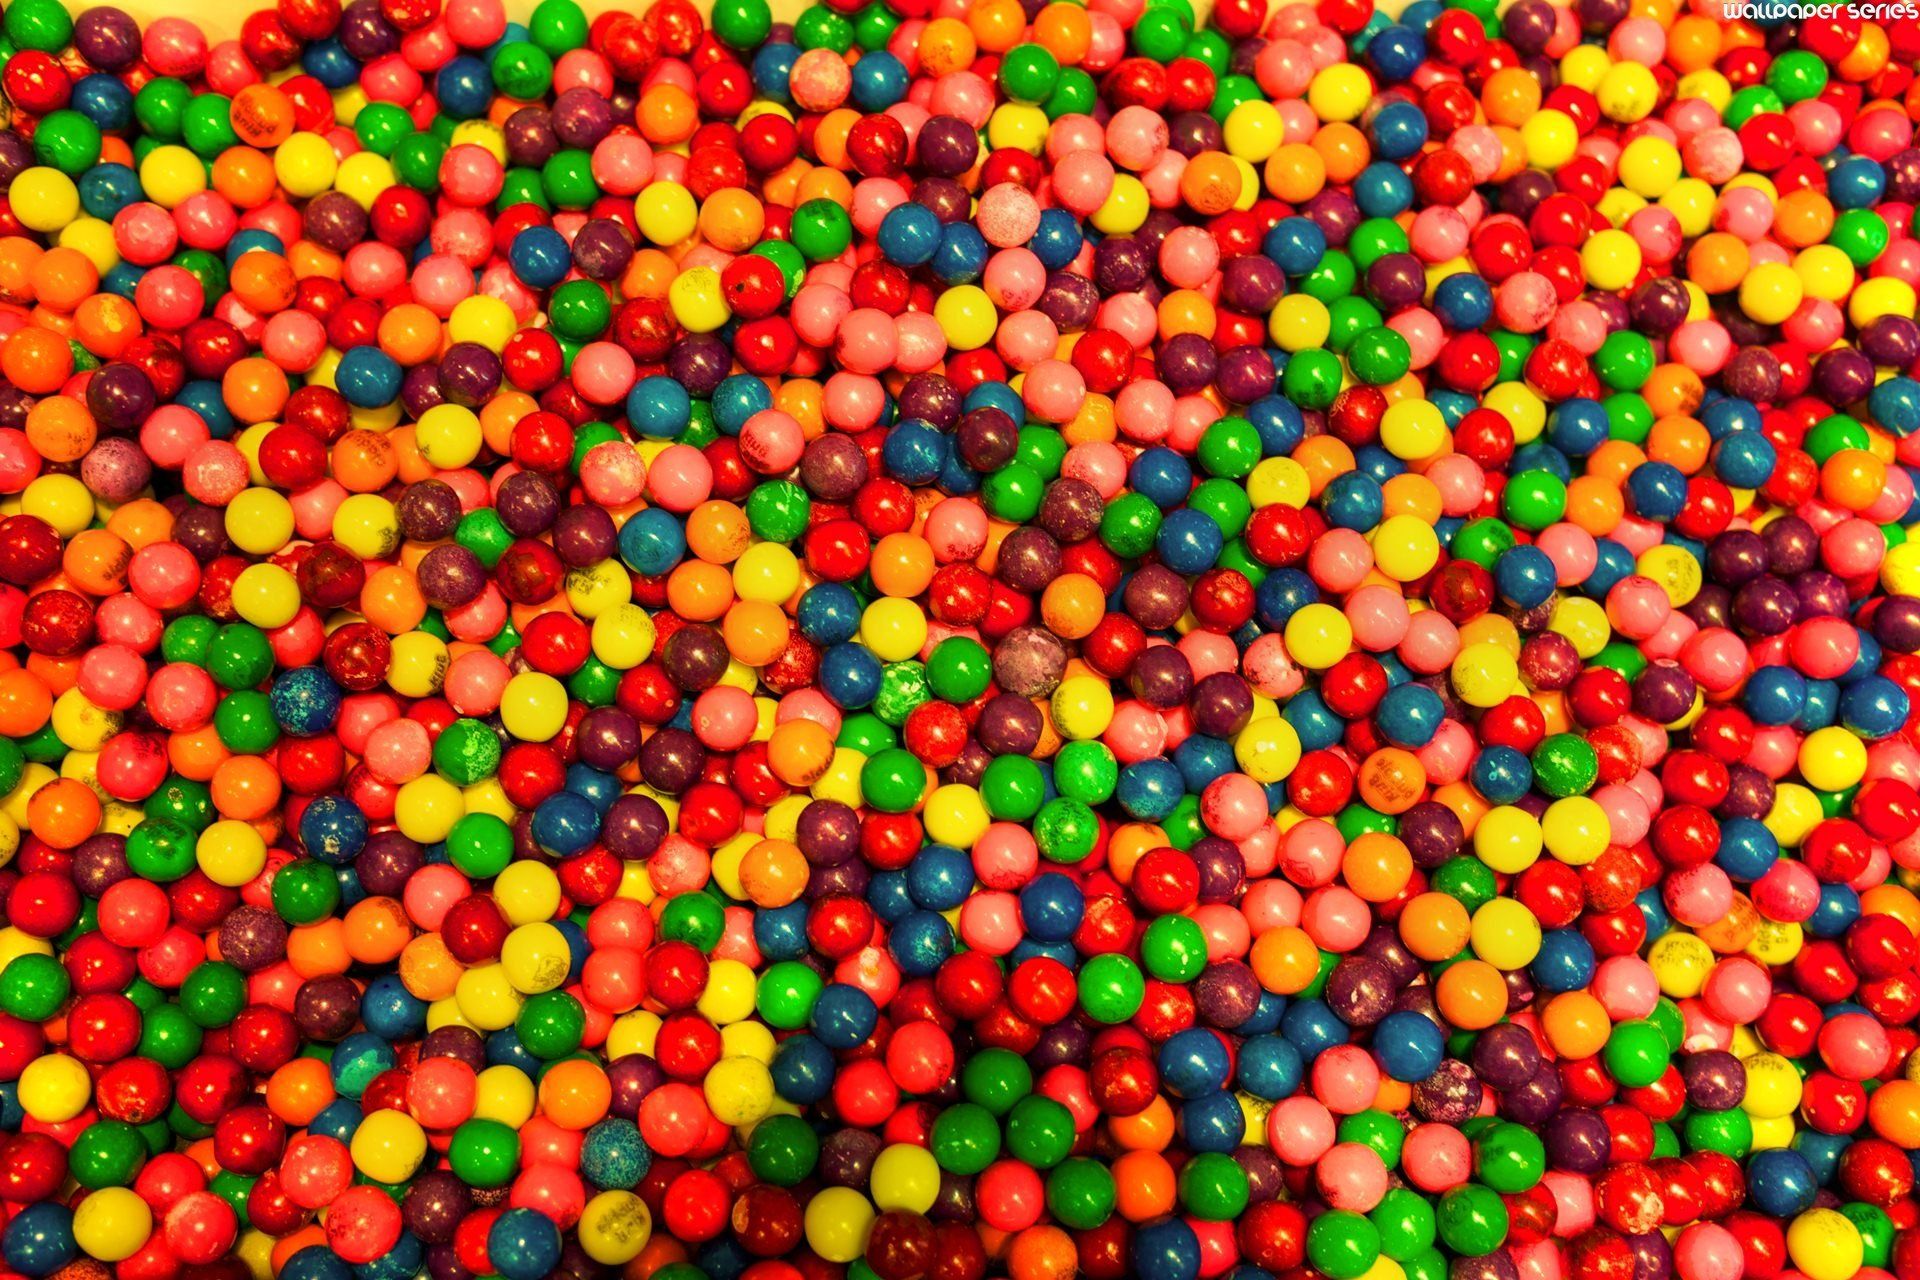 Candy Wallpaper Android Apps on Google Play 1920×1280 Candy Wallpaper (40 Wallpaper). Adorable Wallpaper. Candy image, Sweet candy, Candy